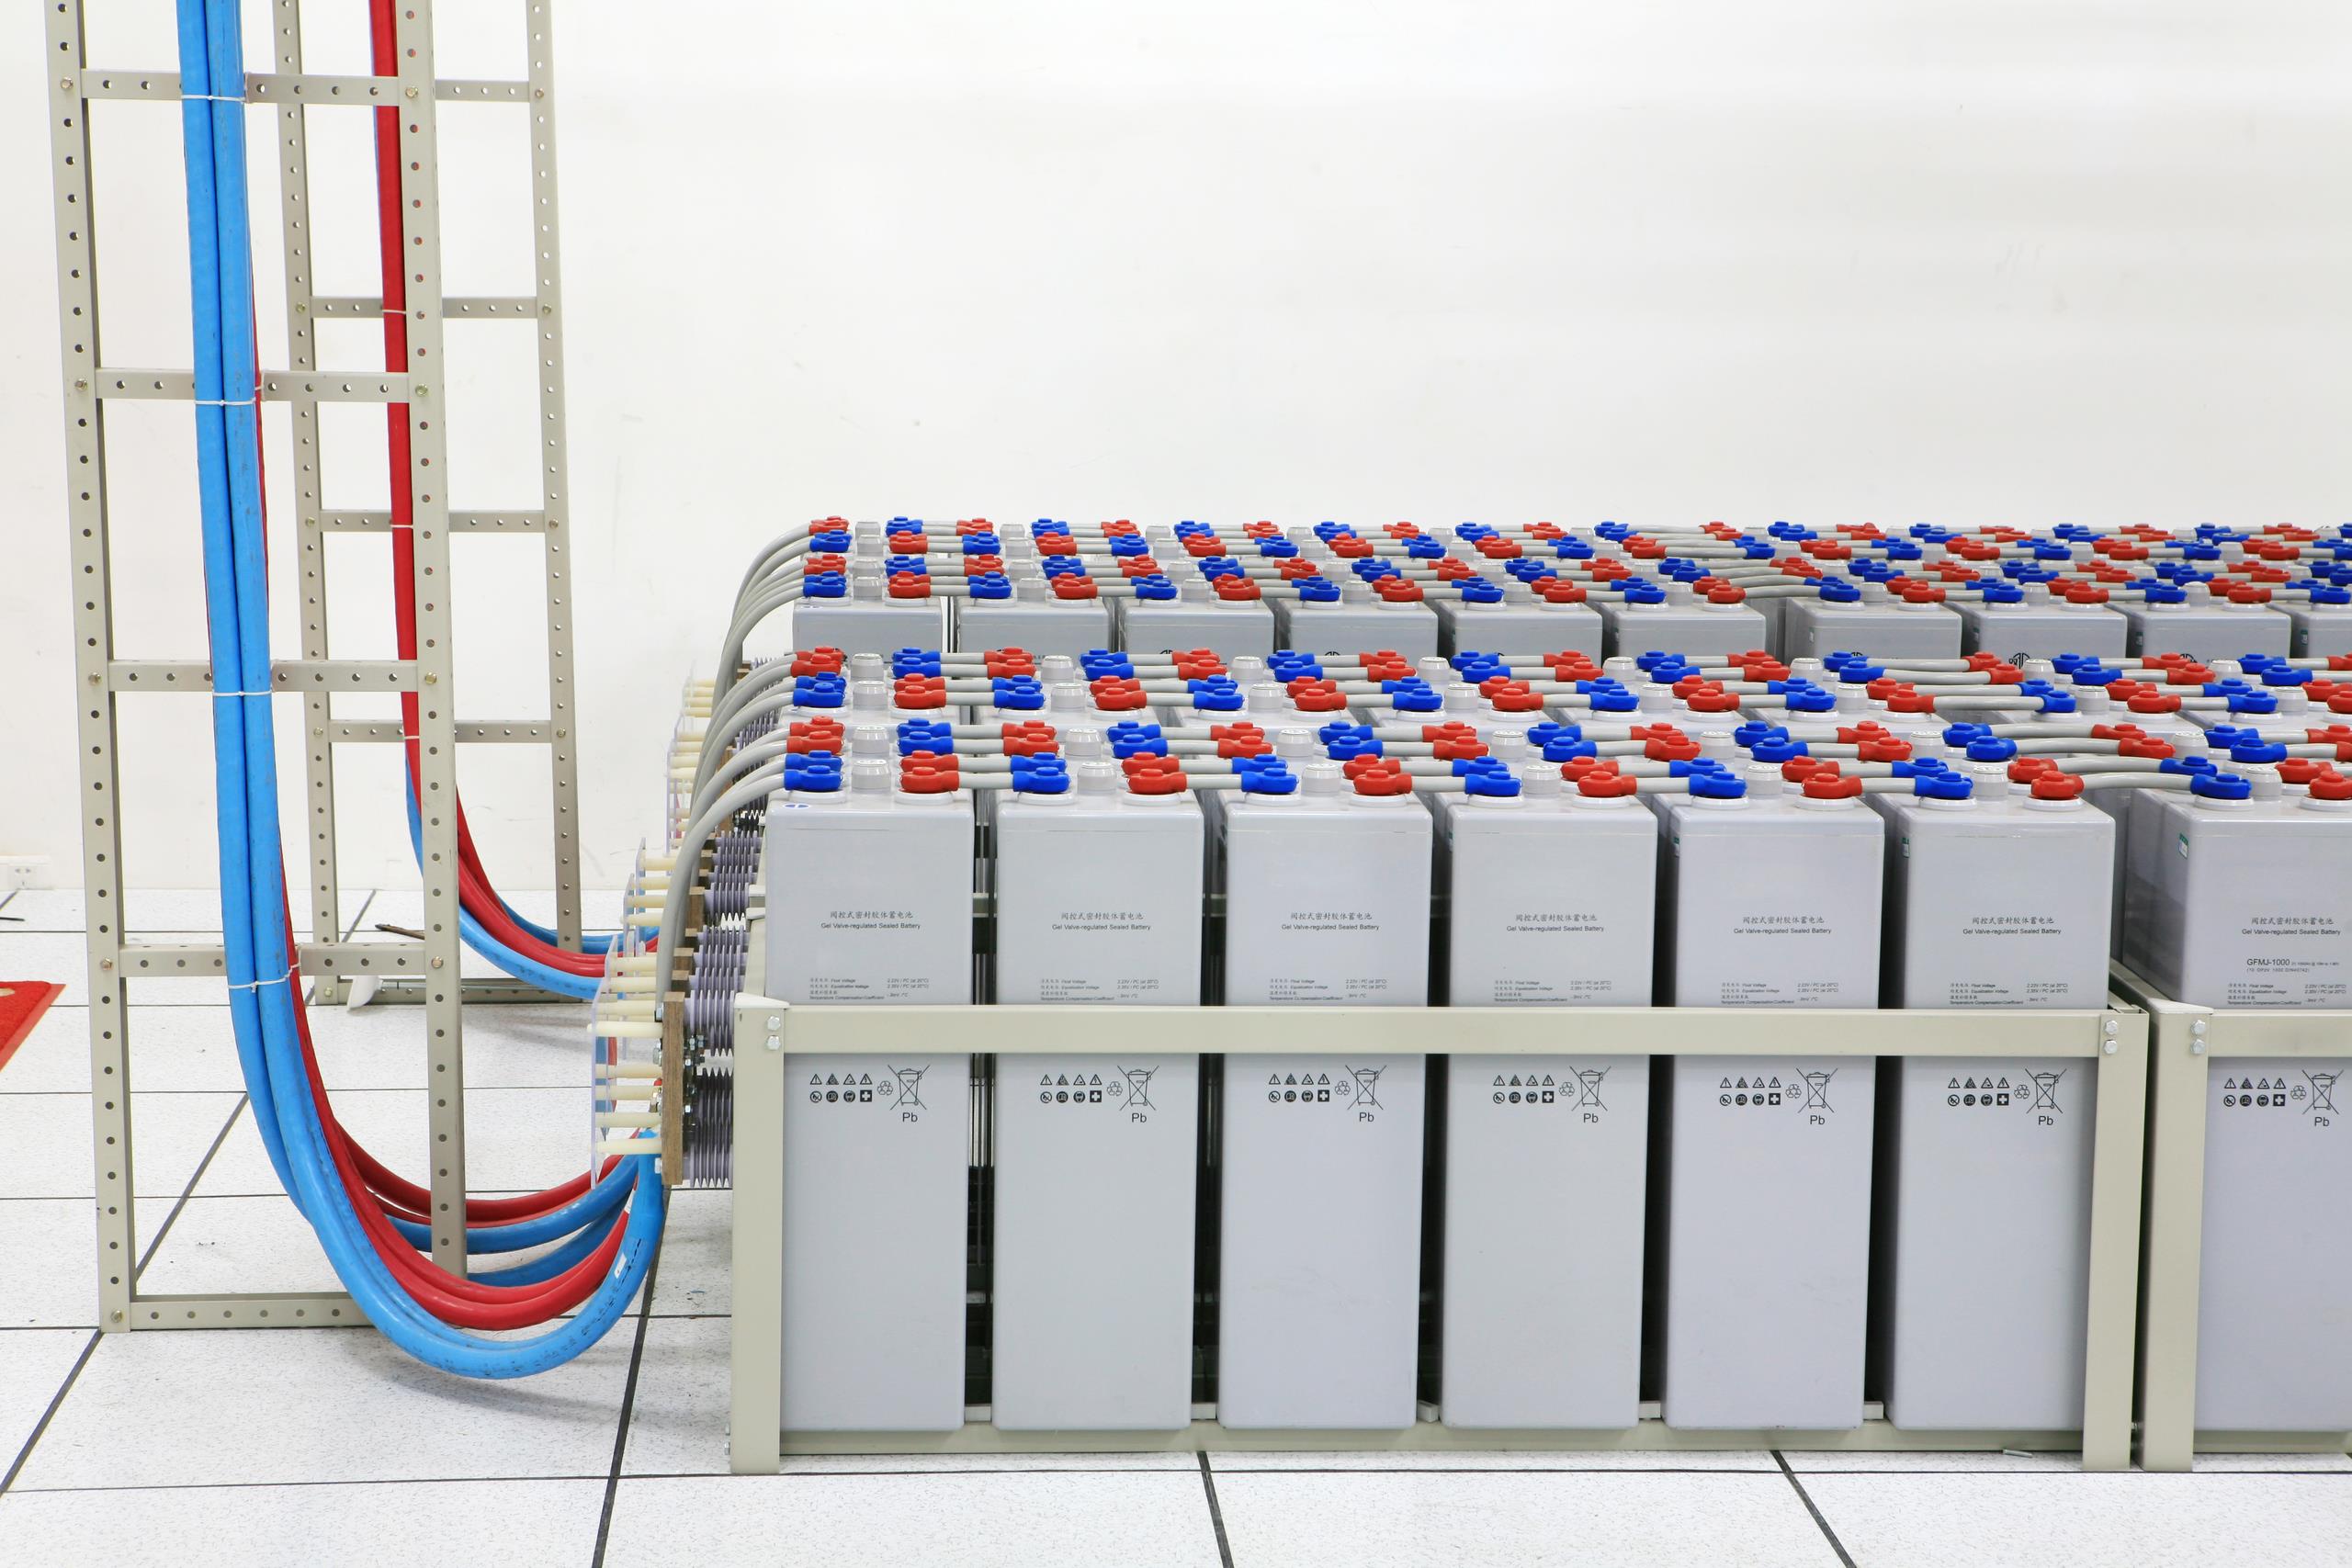 Large-scale battery storage in operation